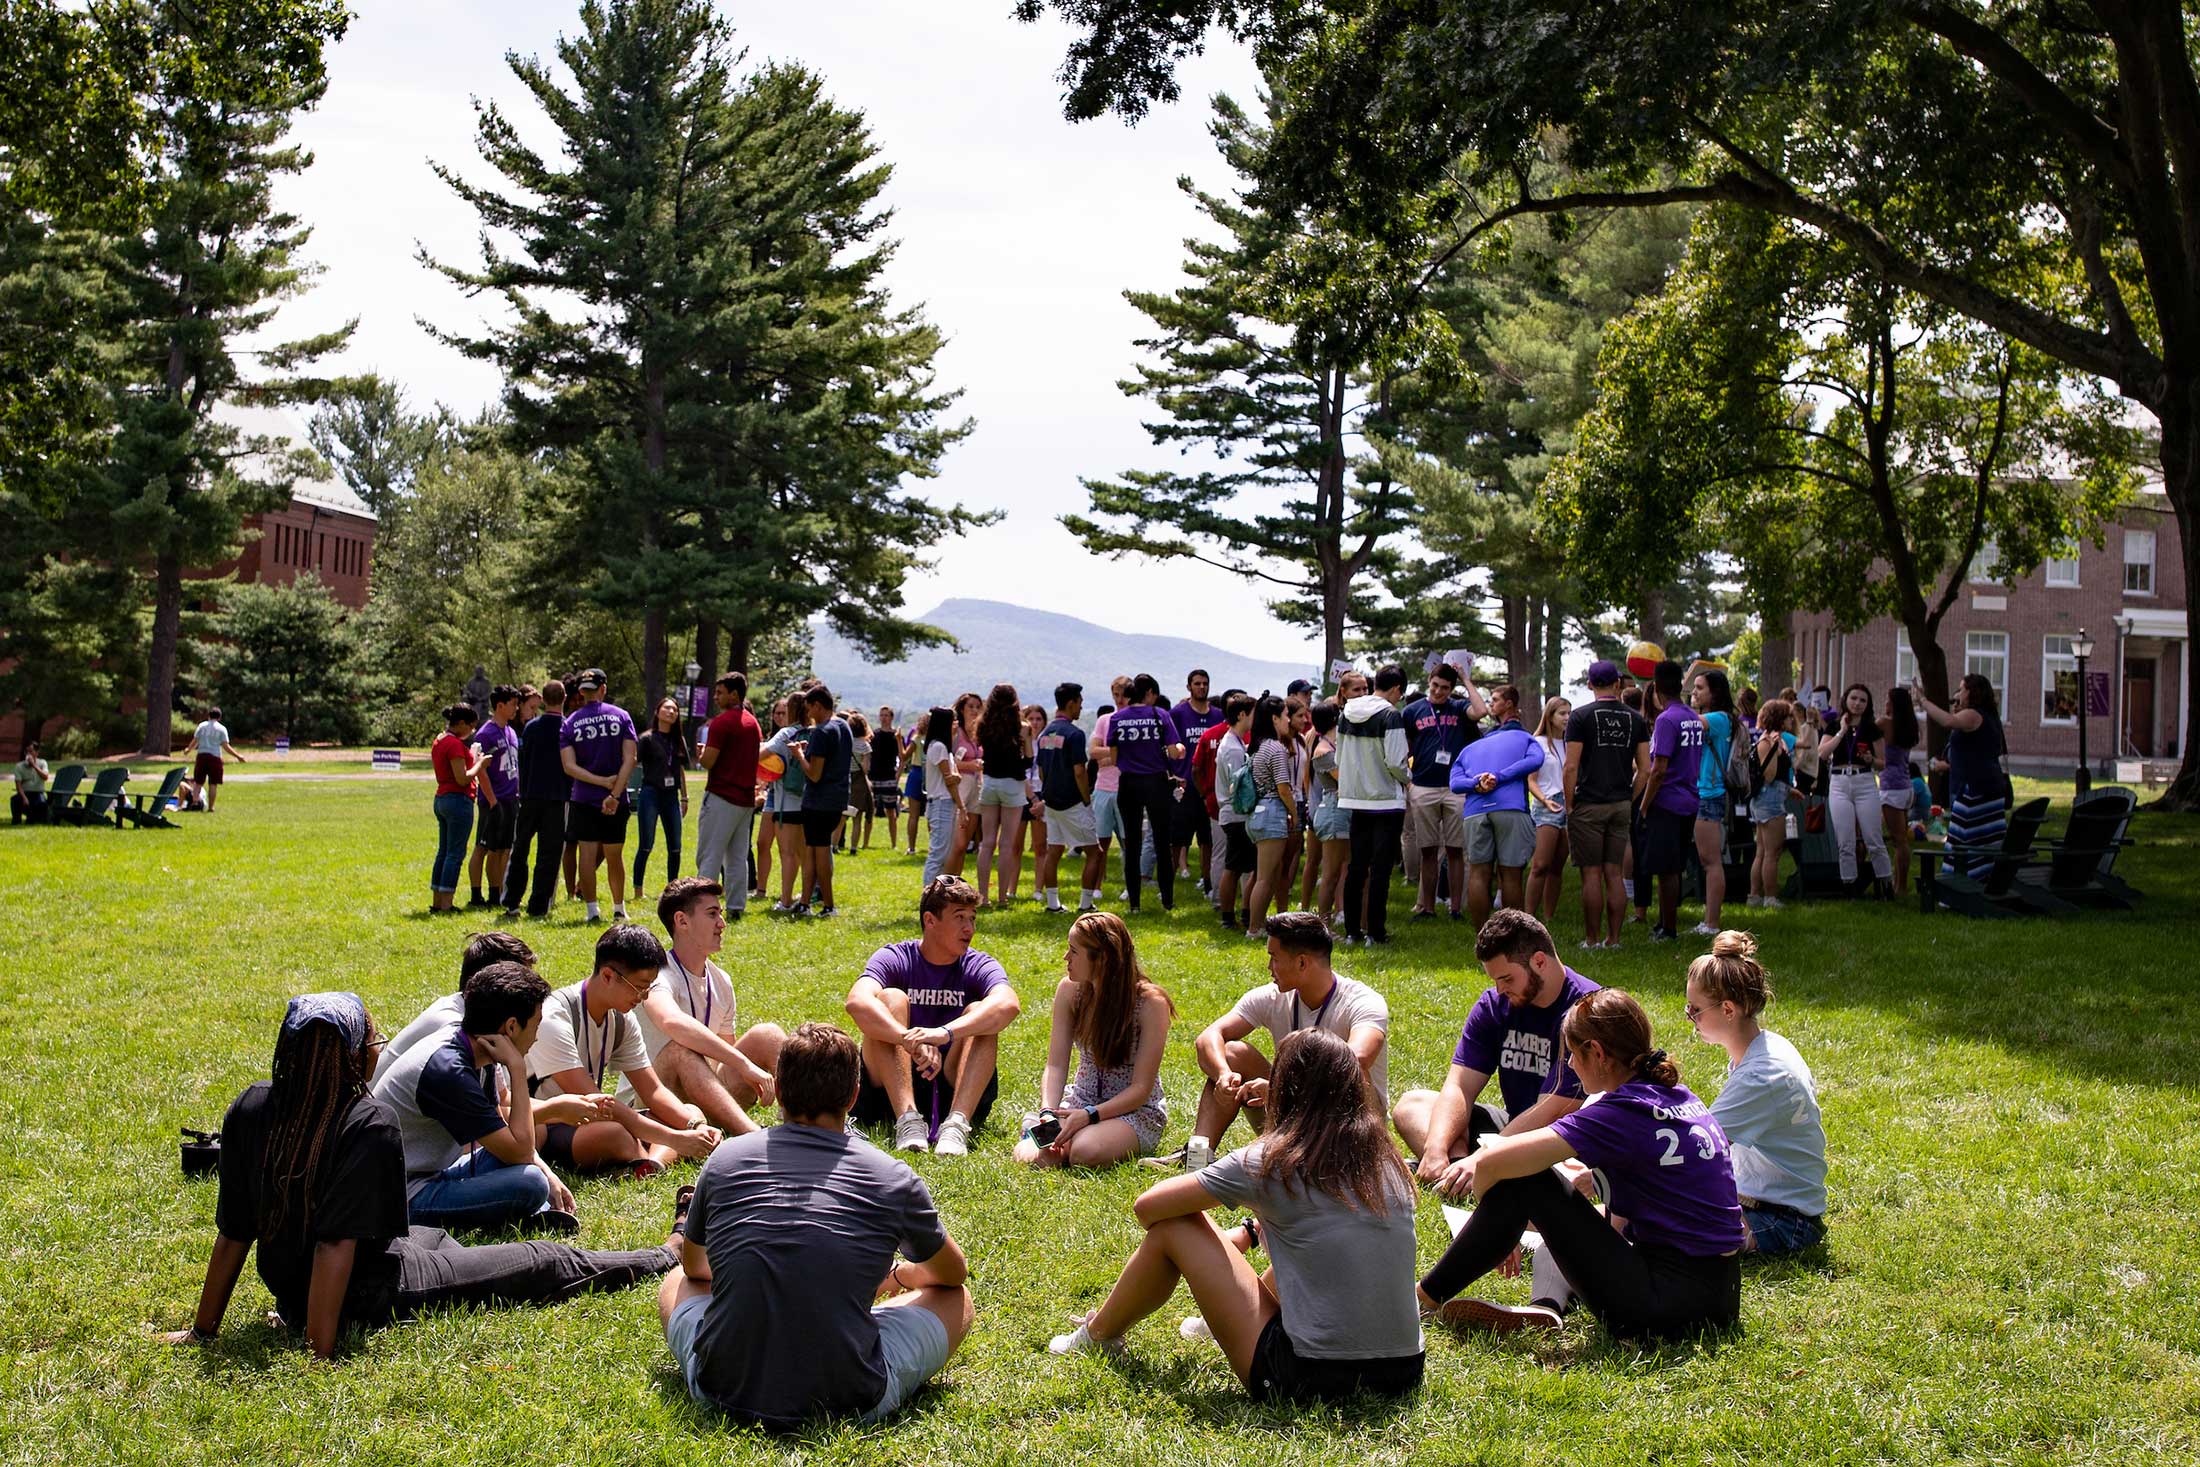 New students break in Squads where they gather in small groups for activities and conversation